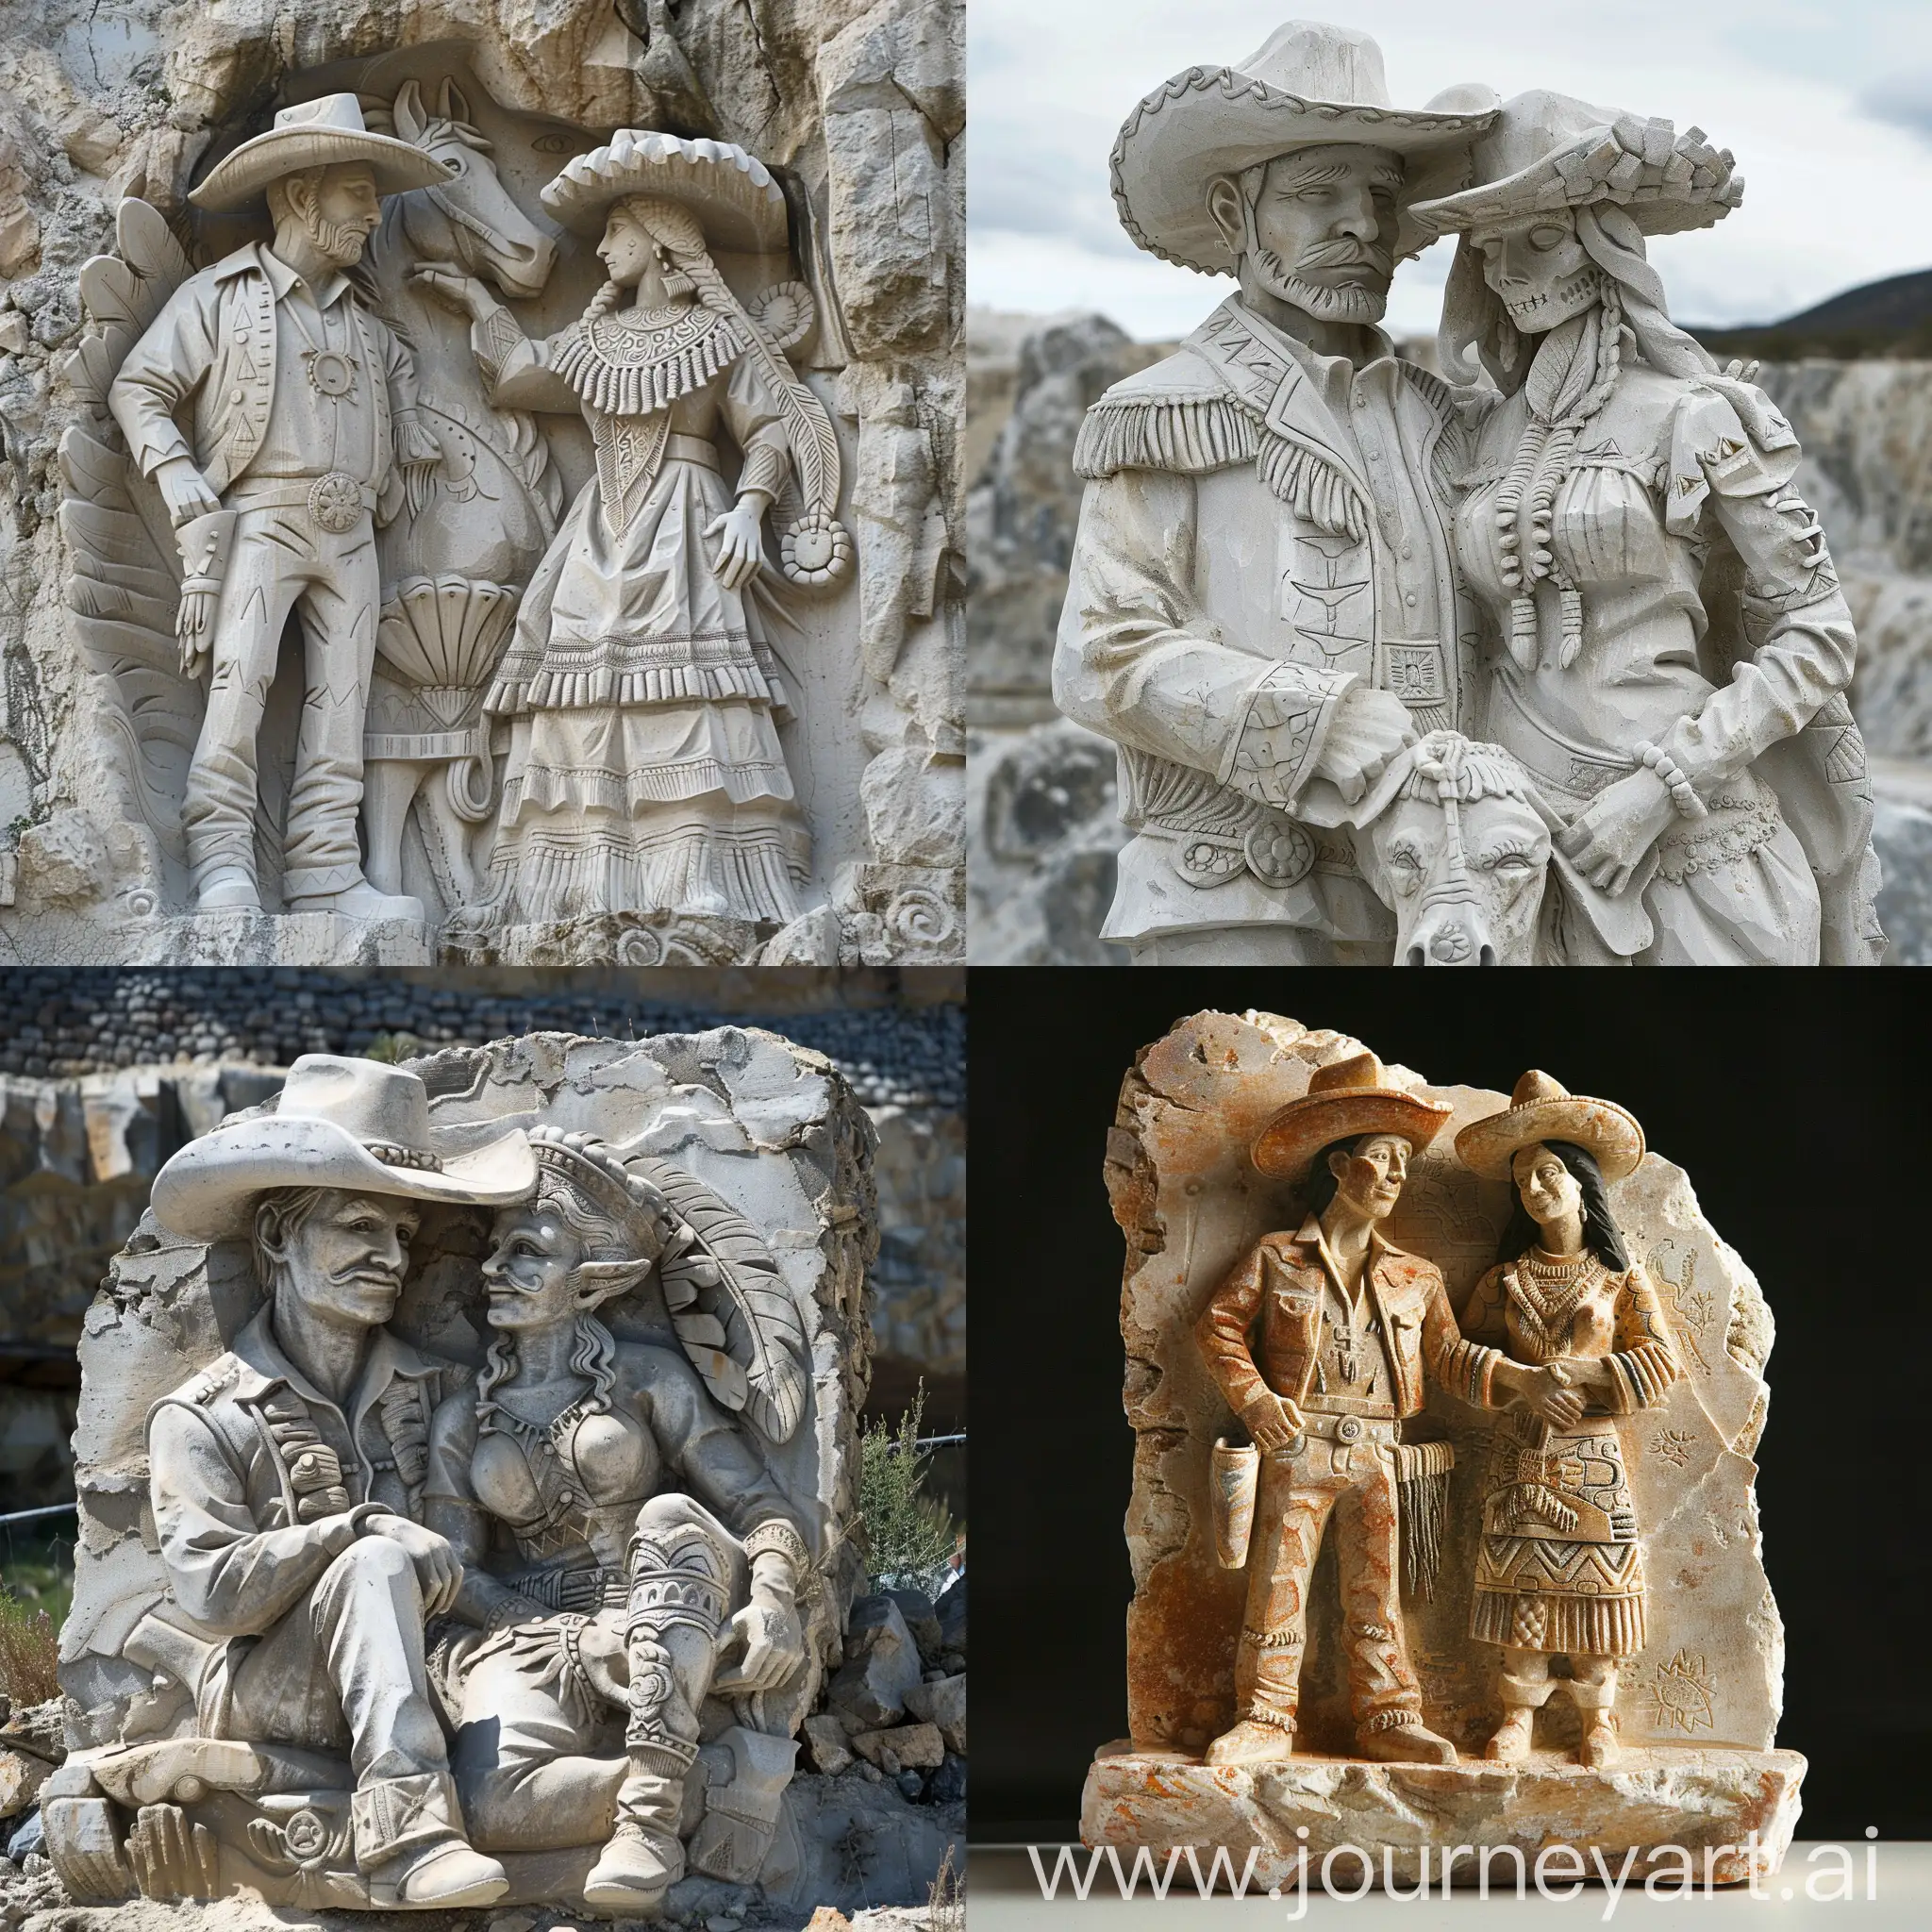 Mexican-Cowboy-Charro-and-Aztec-Indian-Union-Sculpture